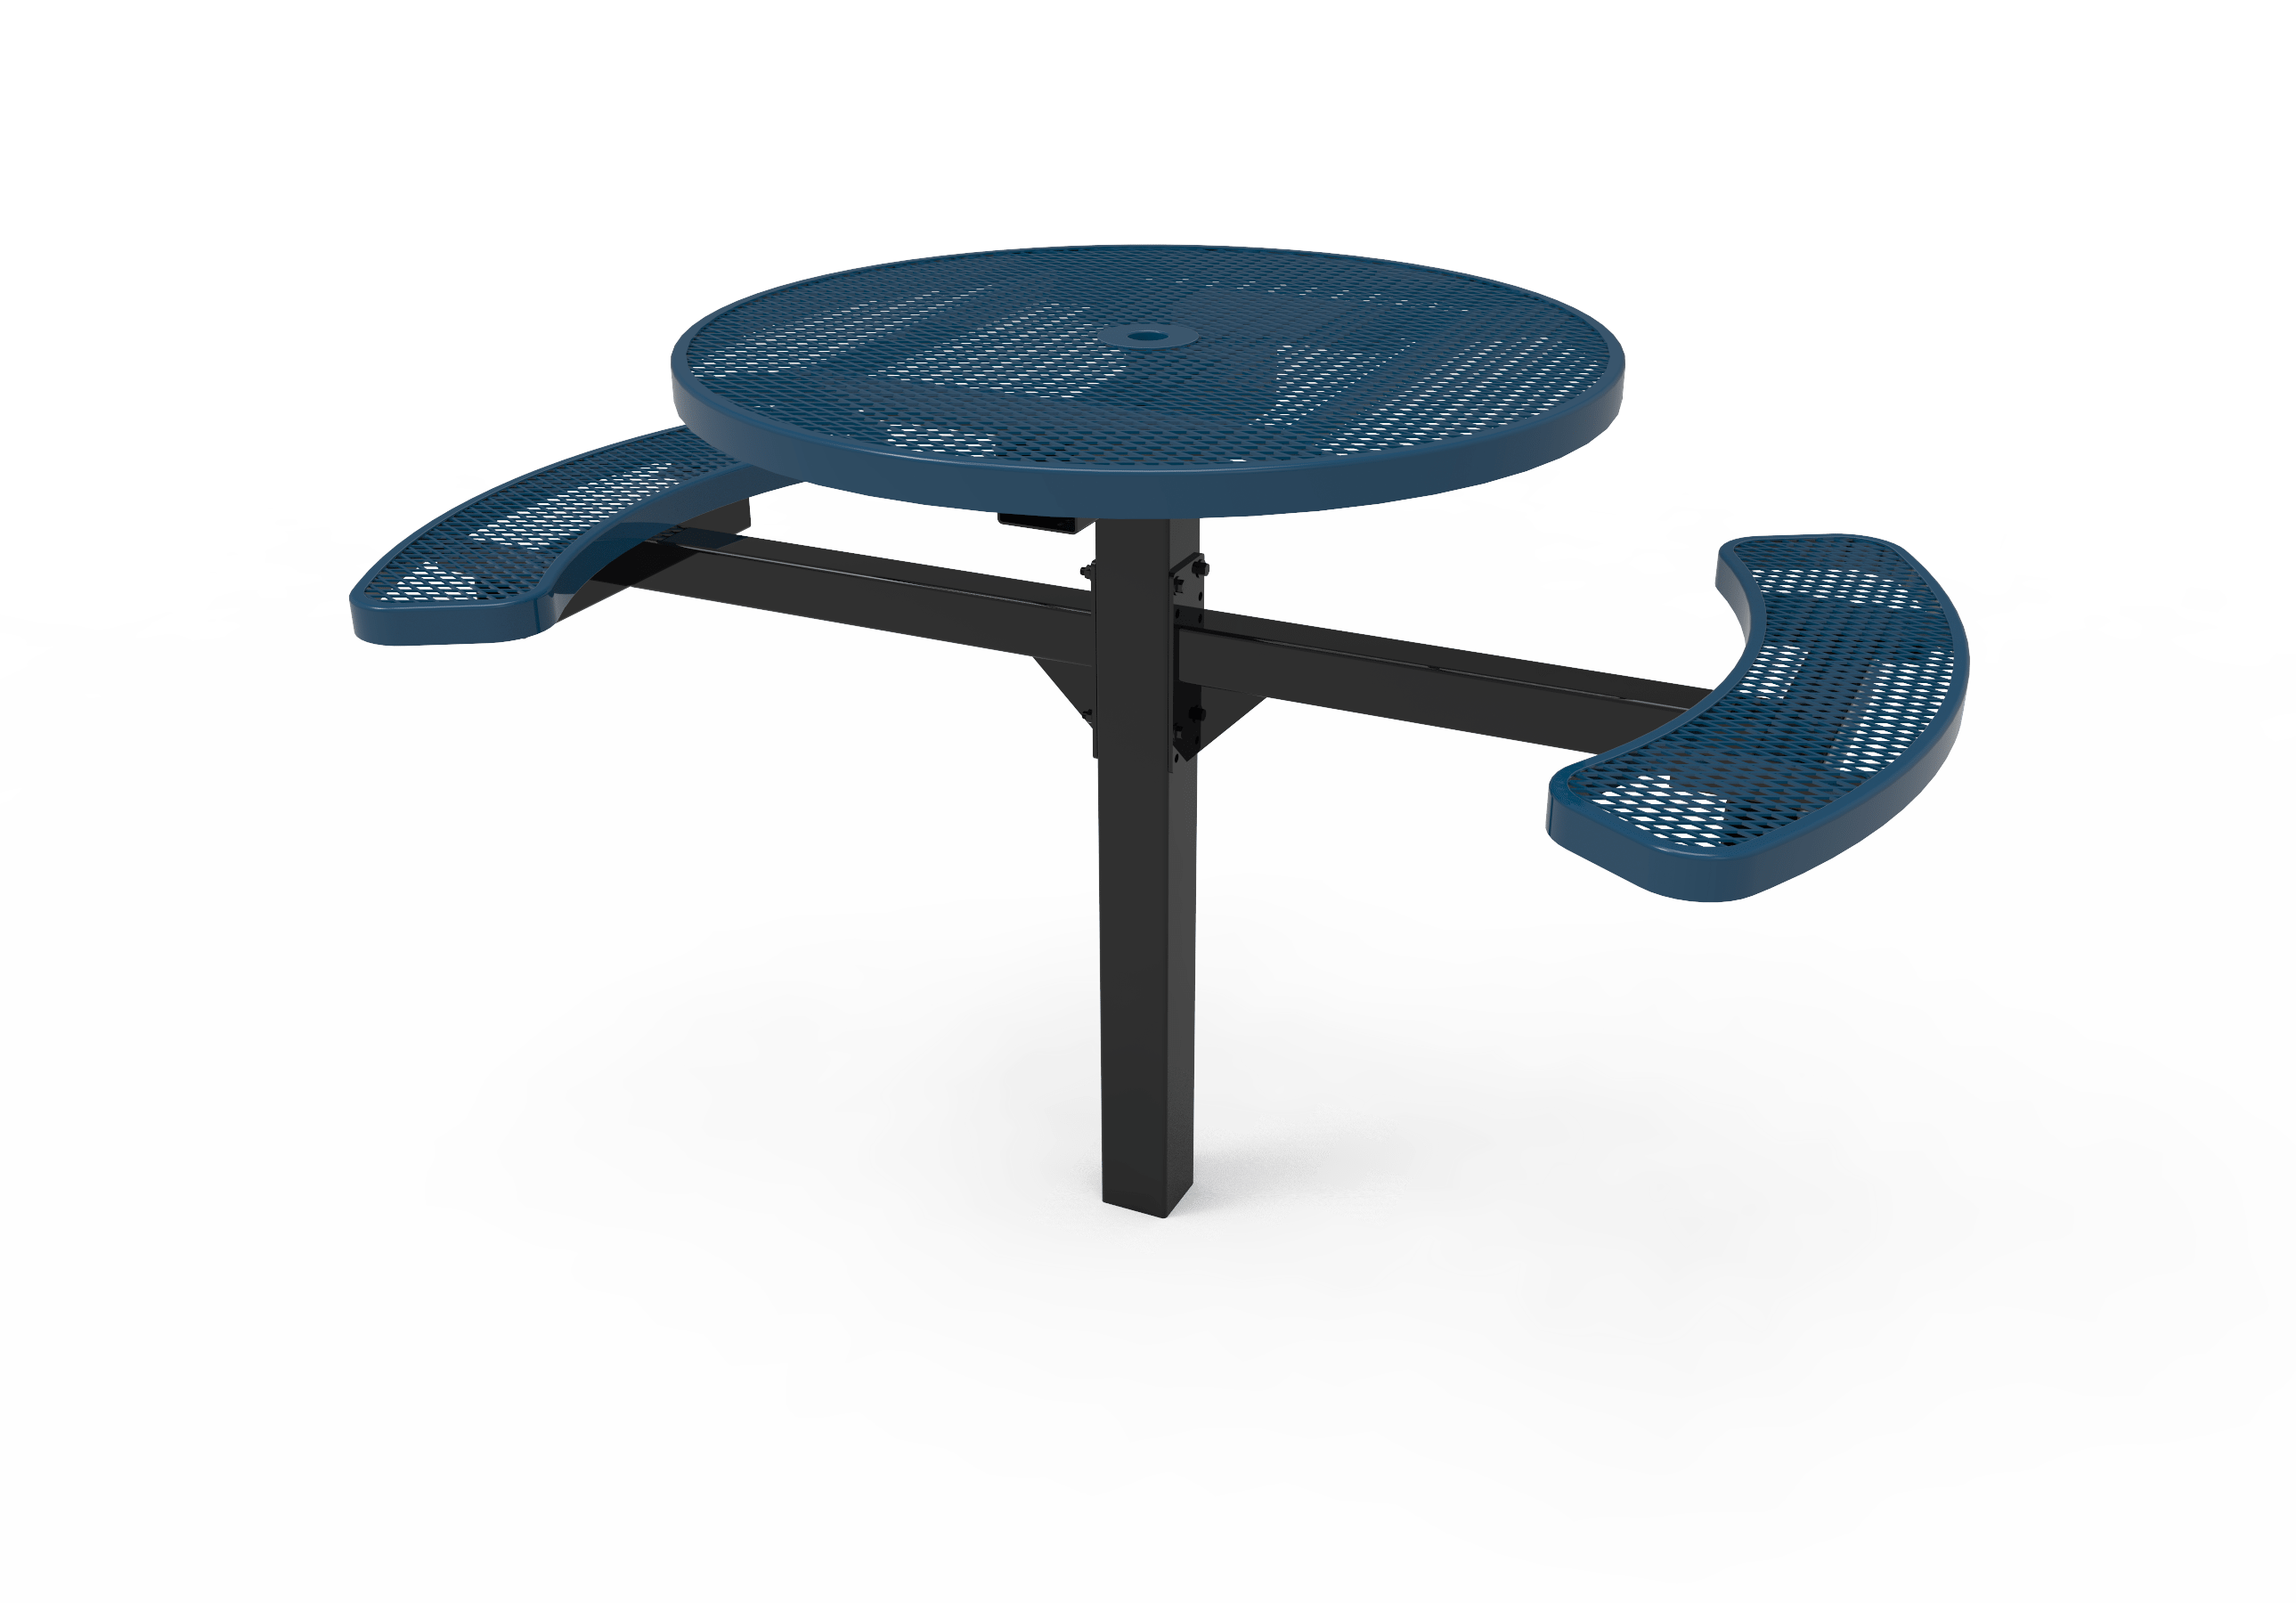 46″ Round Pedestal In Ground Table 2 Seat-Mesh
TRD46-C-16-002
Industry Standard Finish
$1269.00
TRD46-A-16-002
Advantage Premium Finish
$1689.00
